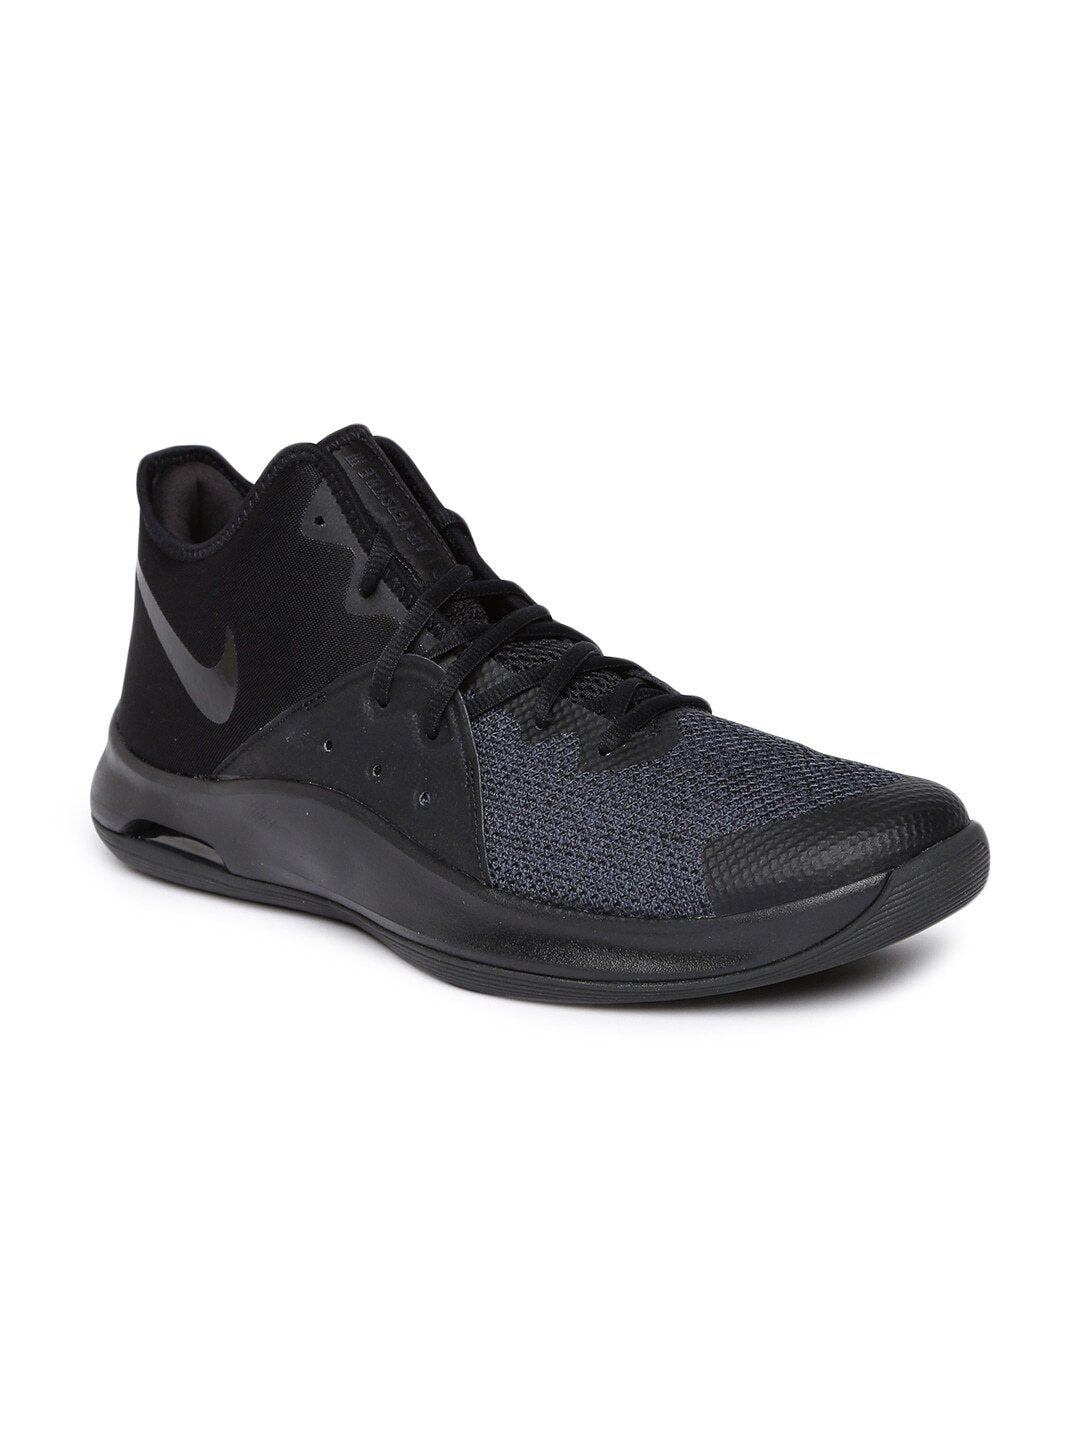 AIR VERSITILE III Basketball Shoes - Discount Store